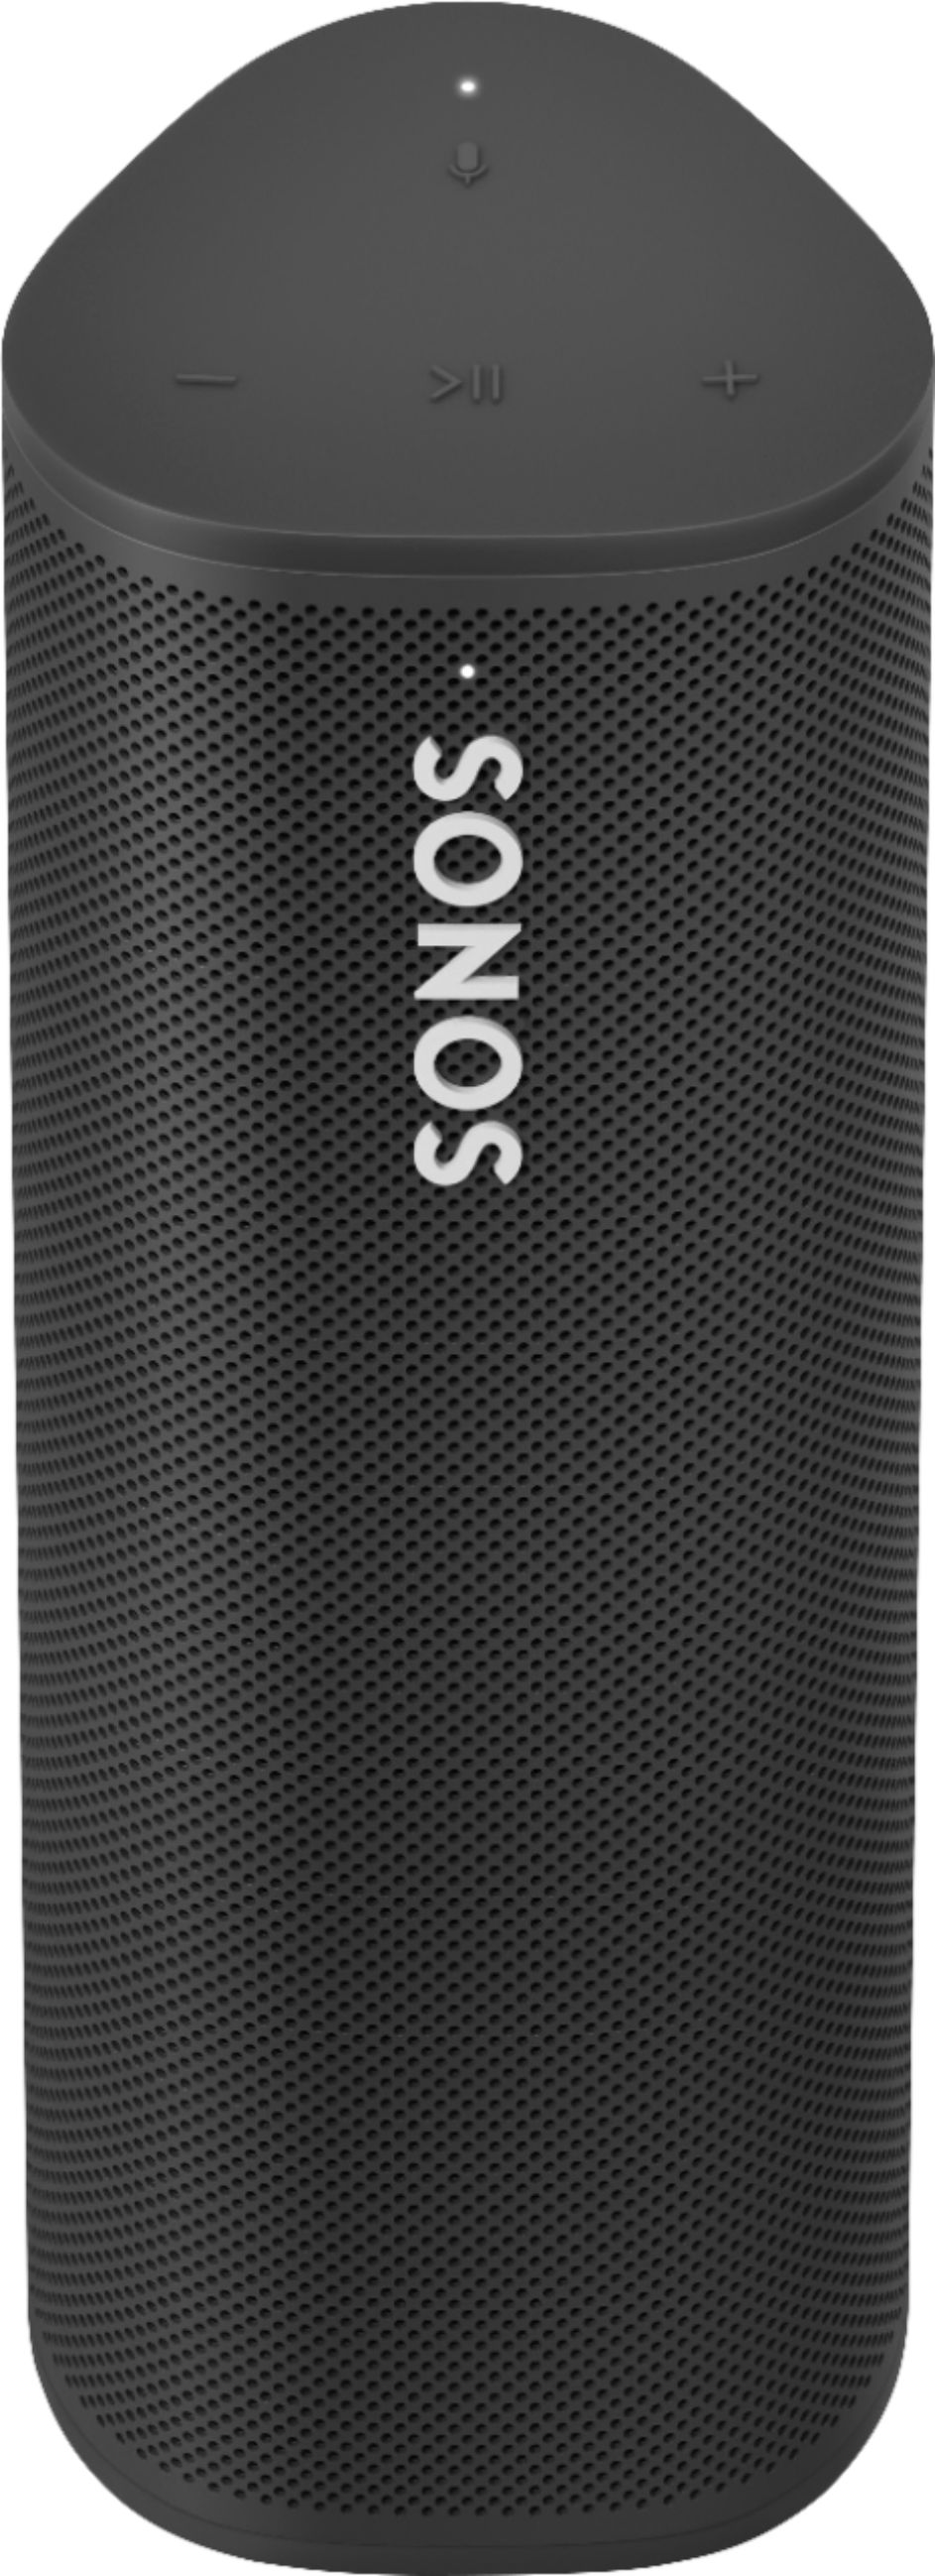 Mexico Puntero Aumentar Sonos Roam Smart Portable Wi-Fi and Bluetooth Speaker with Amazon Alexa and  Google Assistant Black ROAM1US1BLK - Best Buy